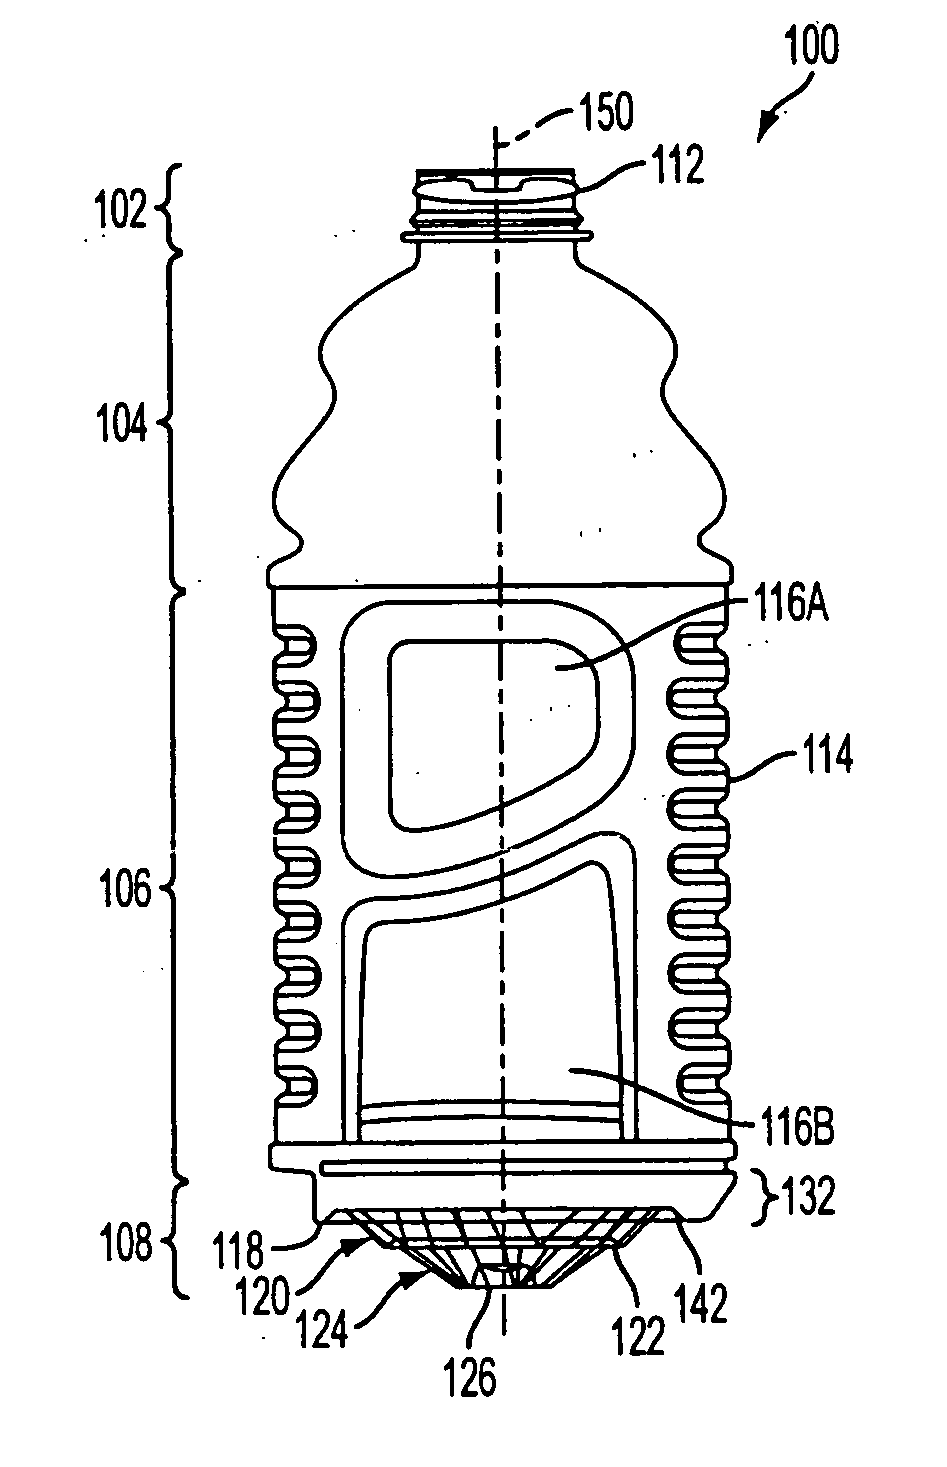 Container and method for blowmolding a base in a partial vacuum pressure reduction setup